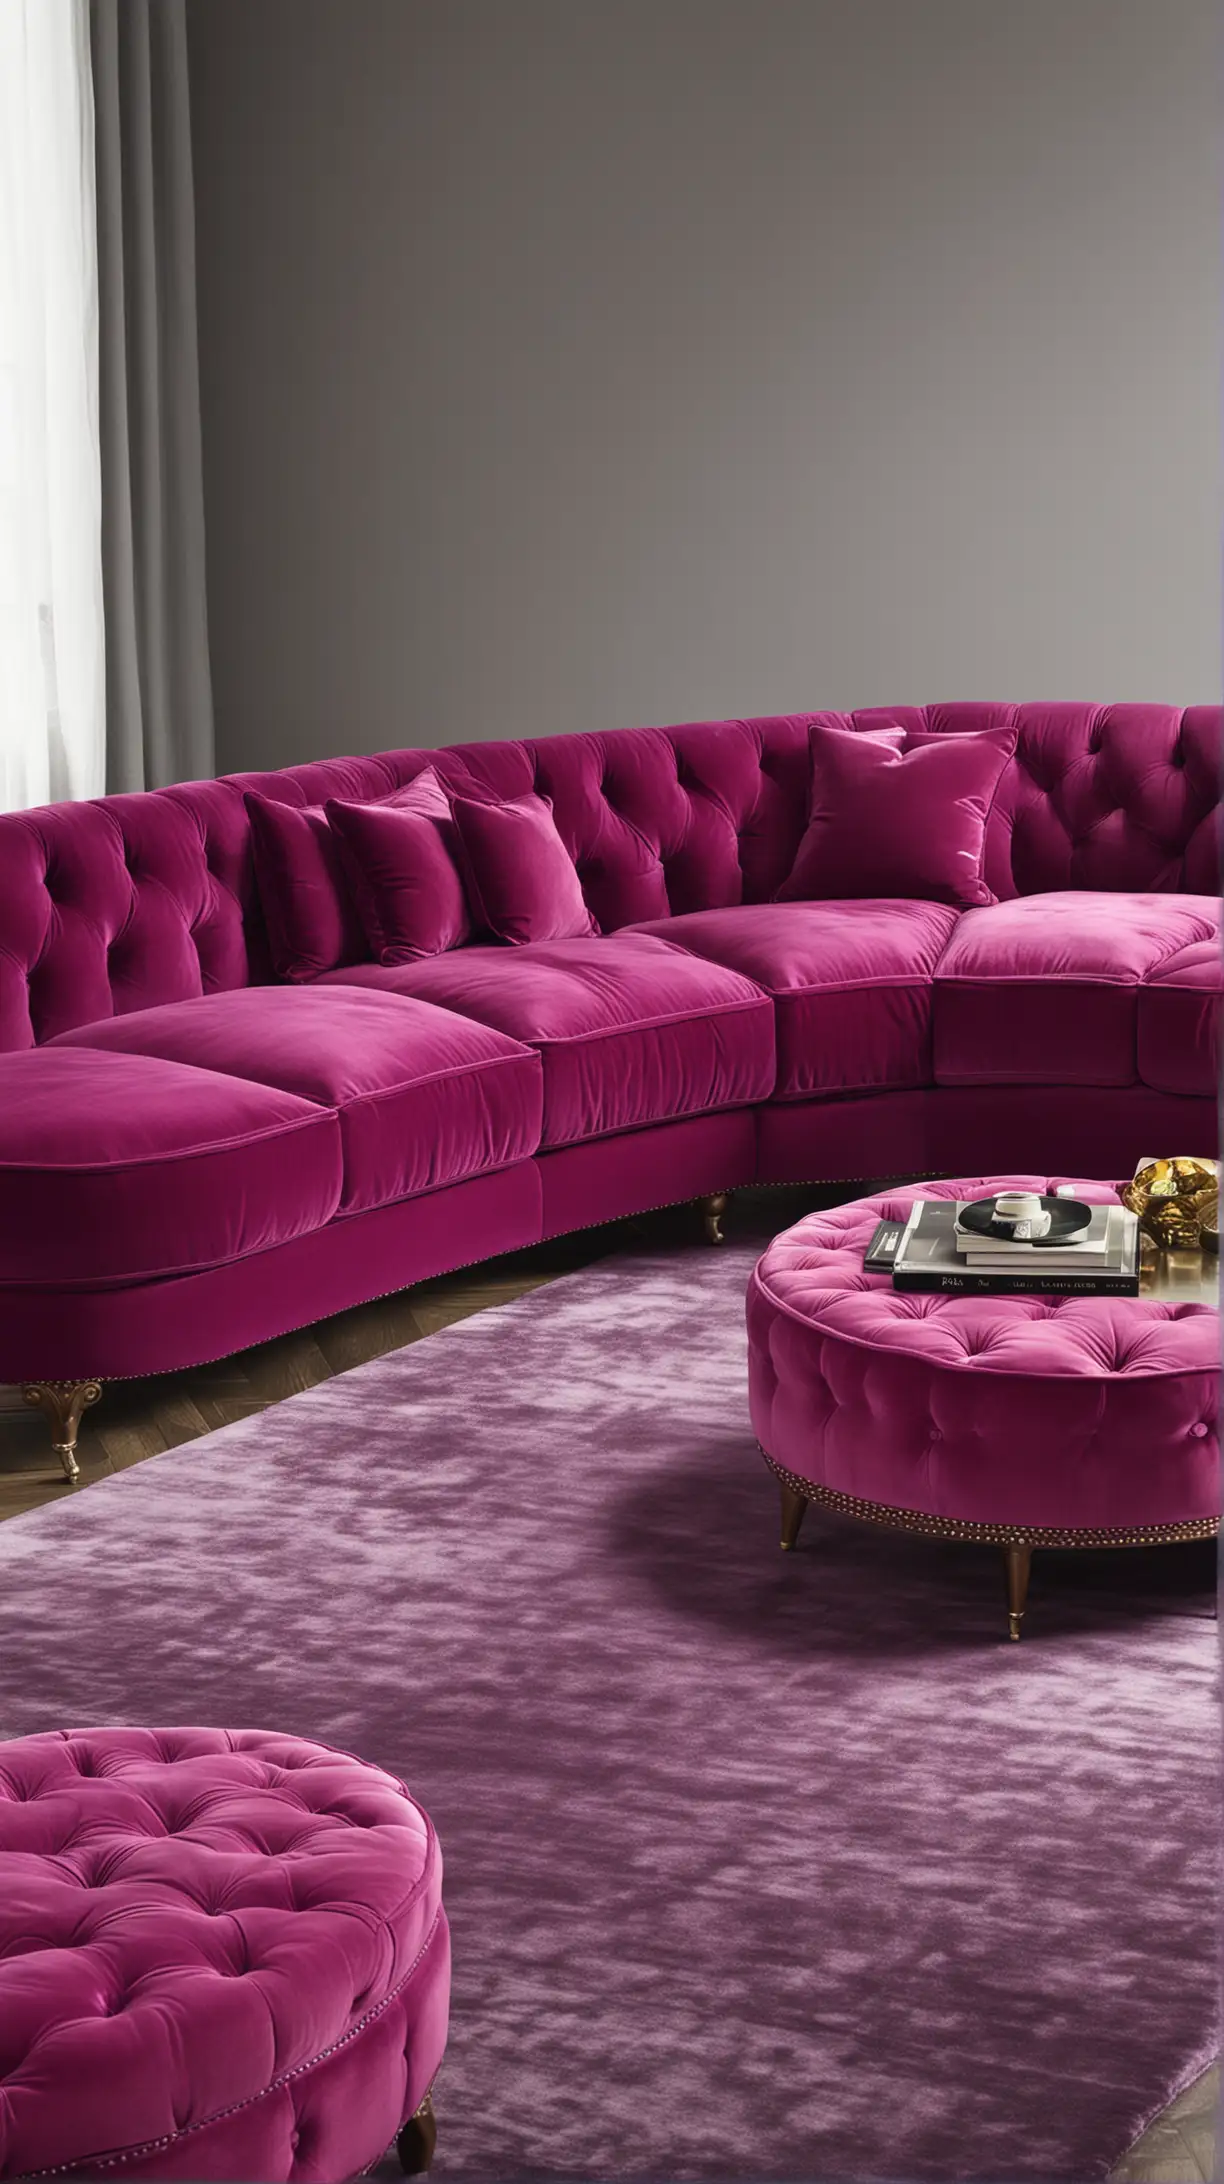 Luxurious Velvet Statement Couch for Chic Living Room Decor